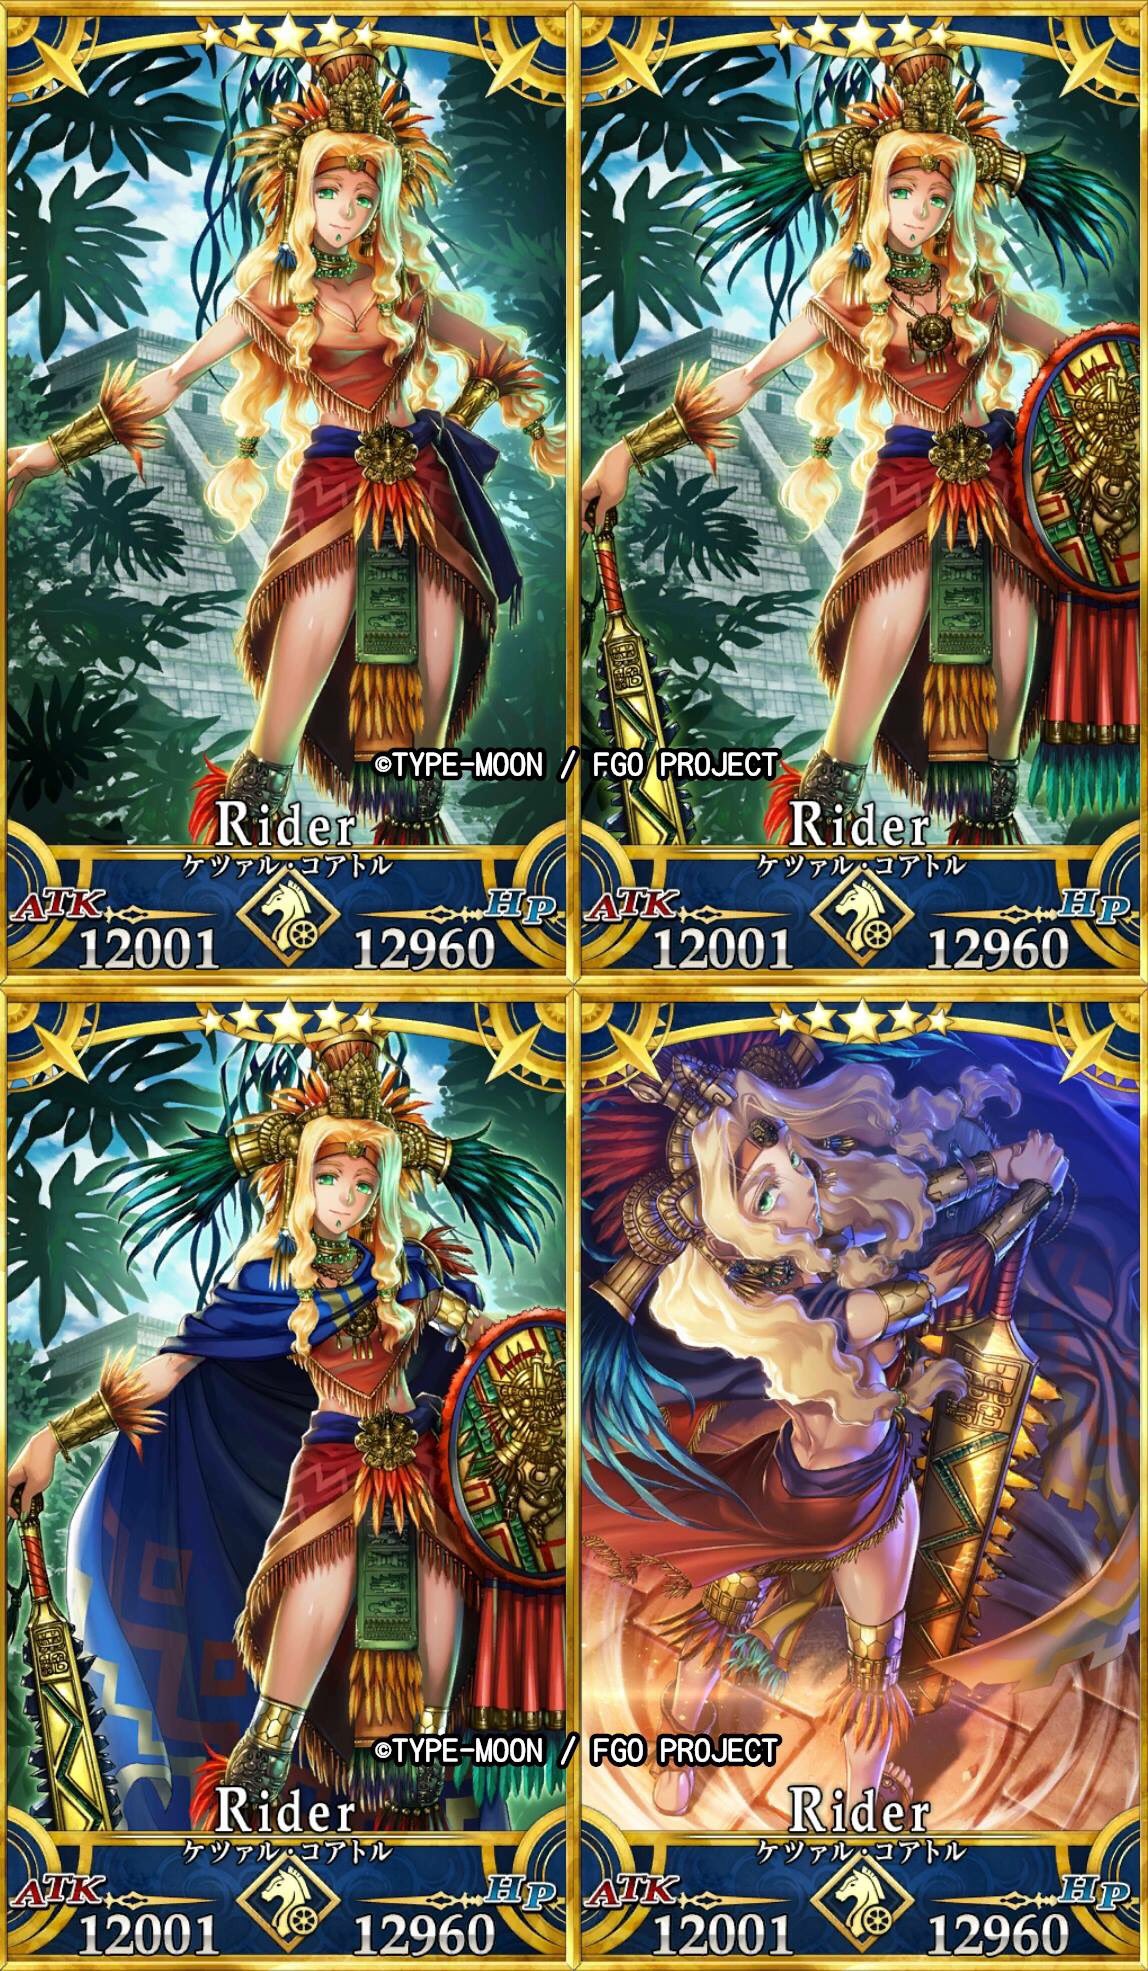 Fate Grand Order Hub Full Art For The Story Unlockables The Rider Is Quetzalcoatl And Gorgon Medusa Respectively Fgo Fatego